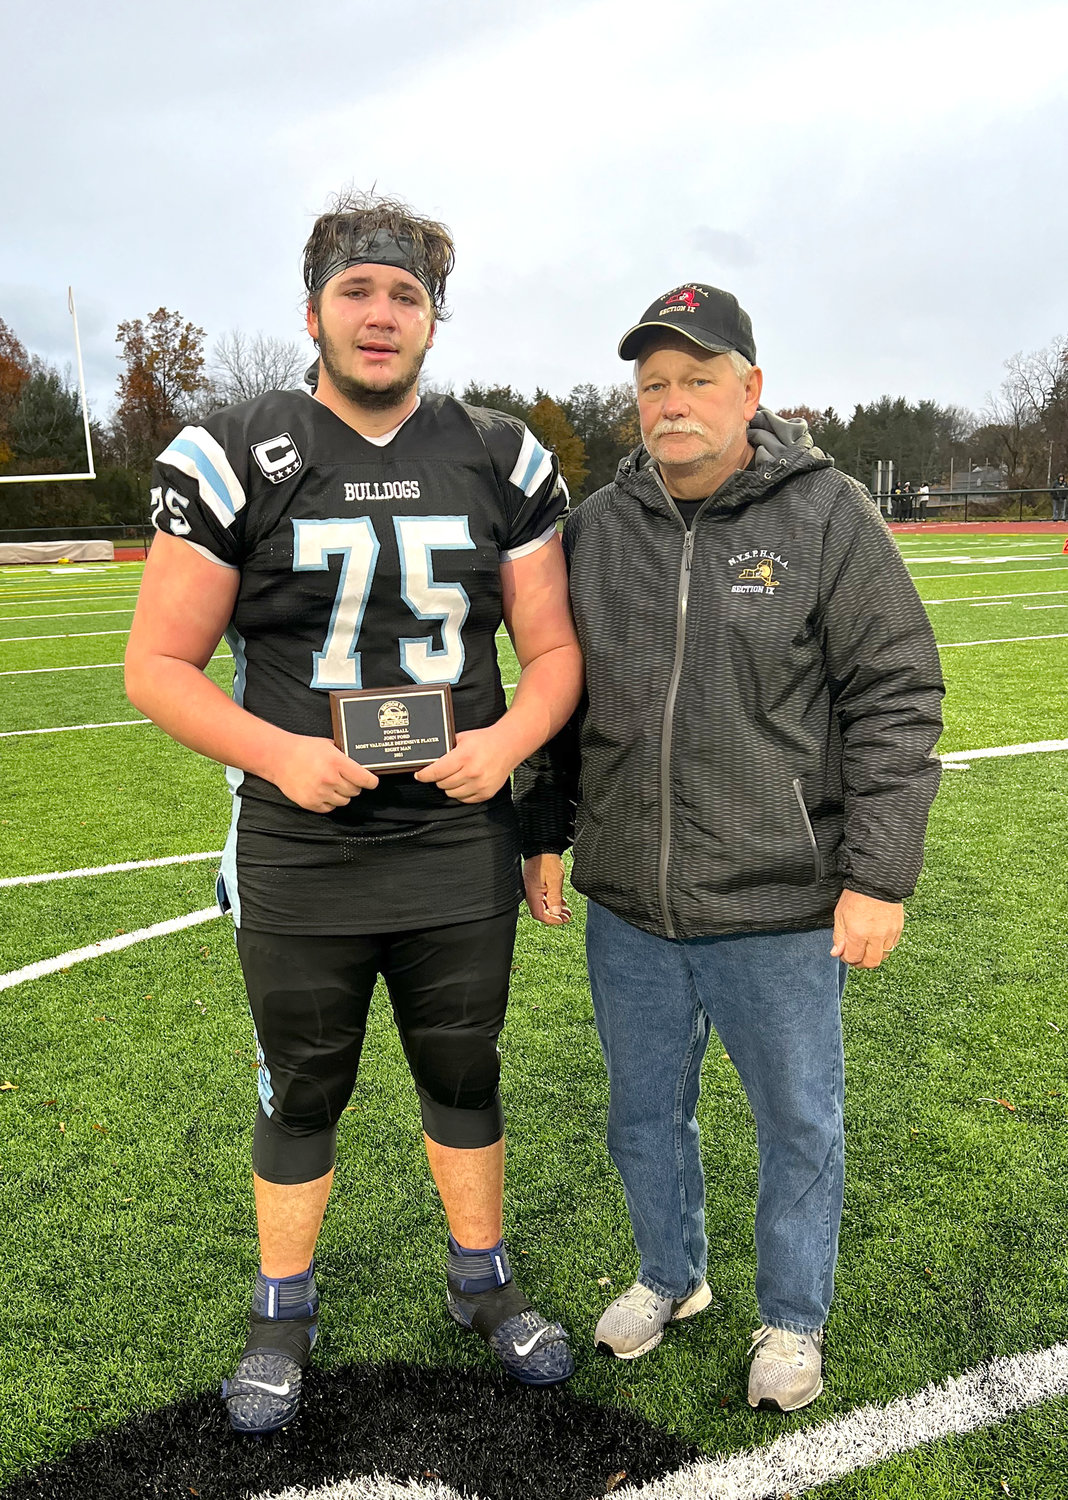 Sullivan West senior Chris Campanelli was named the Defensive MVP. He is pictured with Section IX Eight-Man Football Coordinator David Franskevicz.